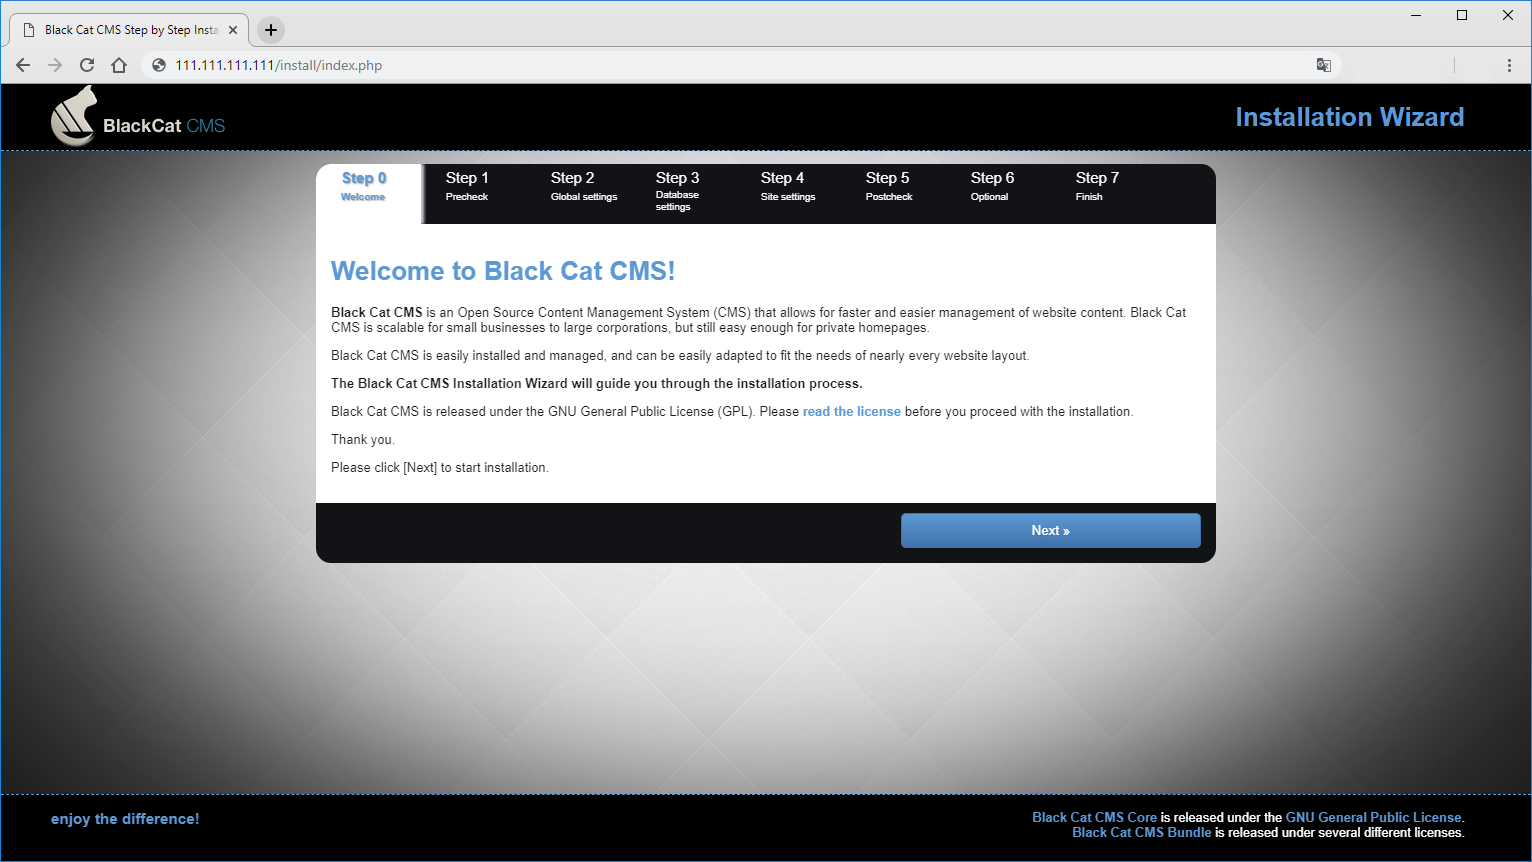 Welcome to Black Cat CMS